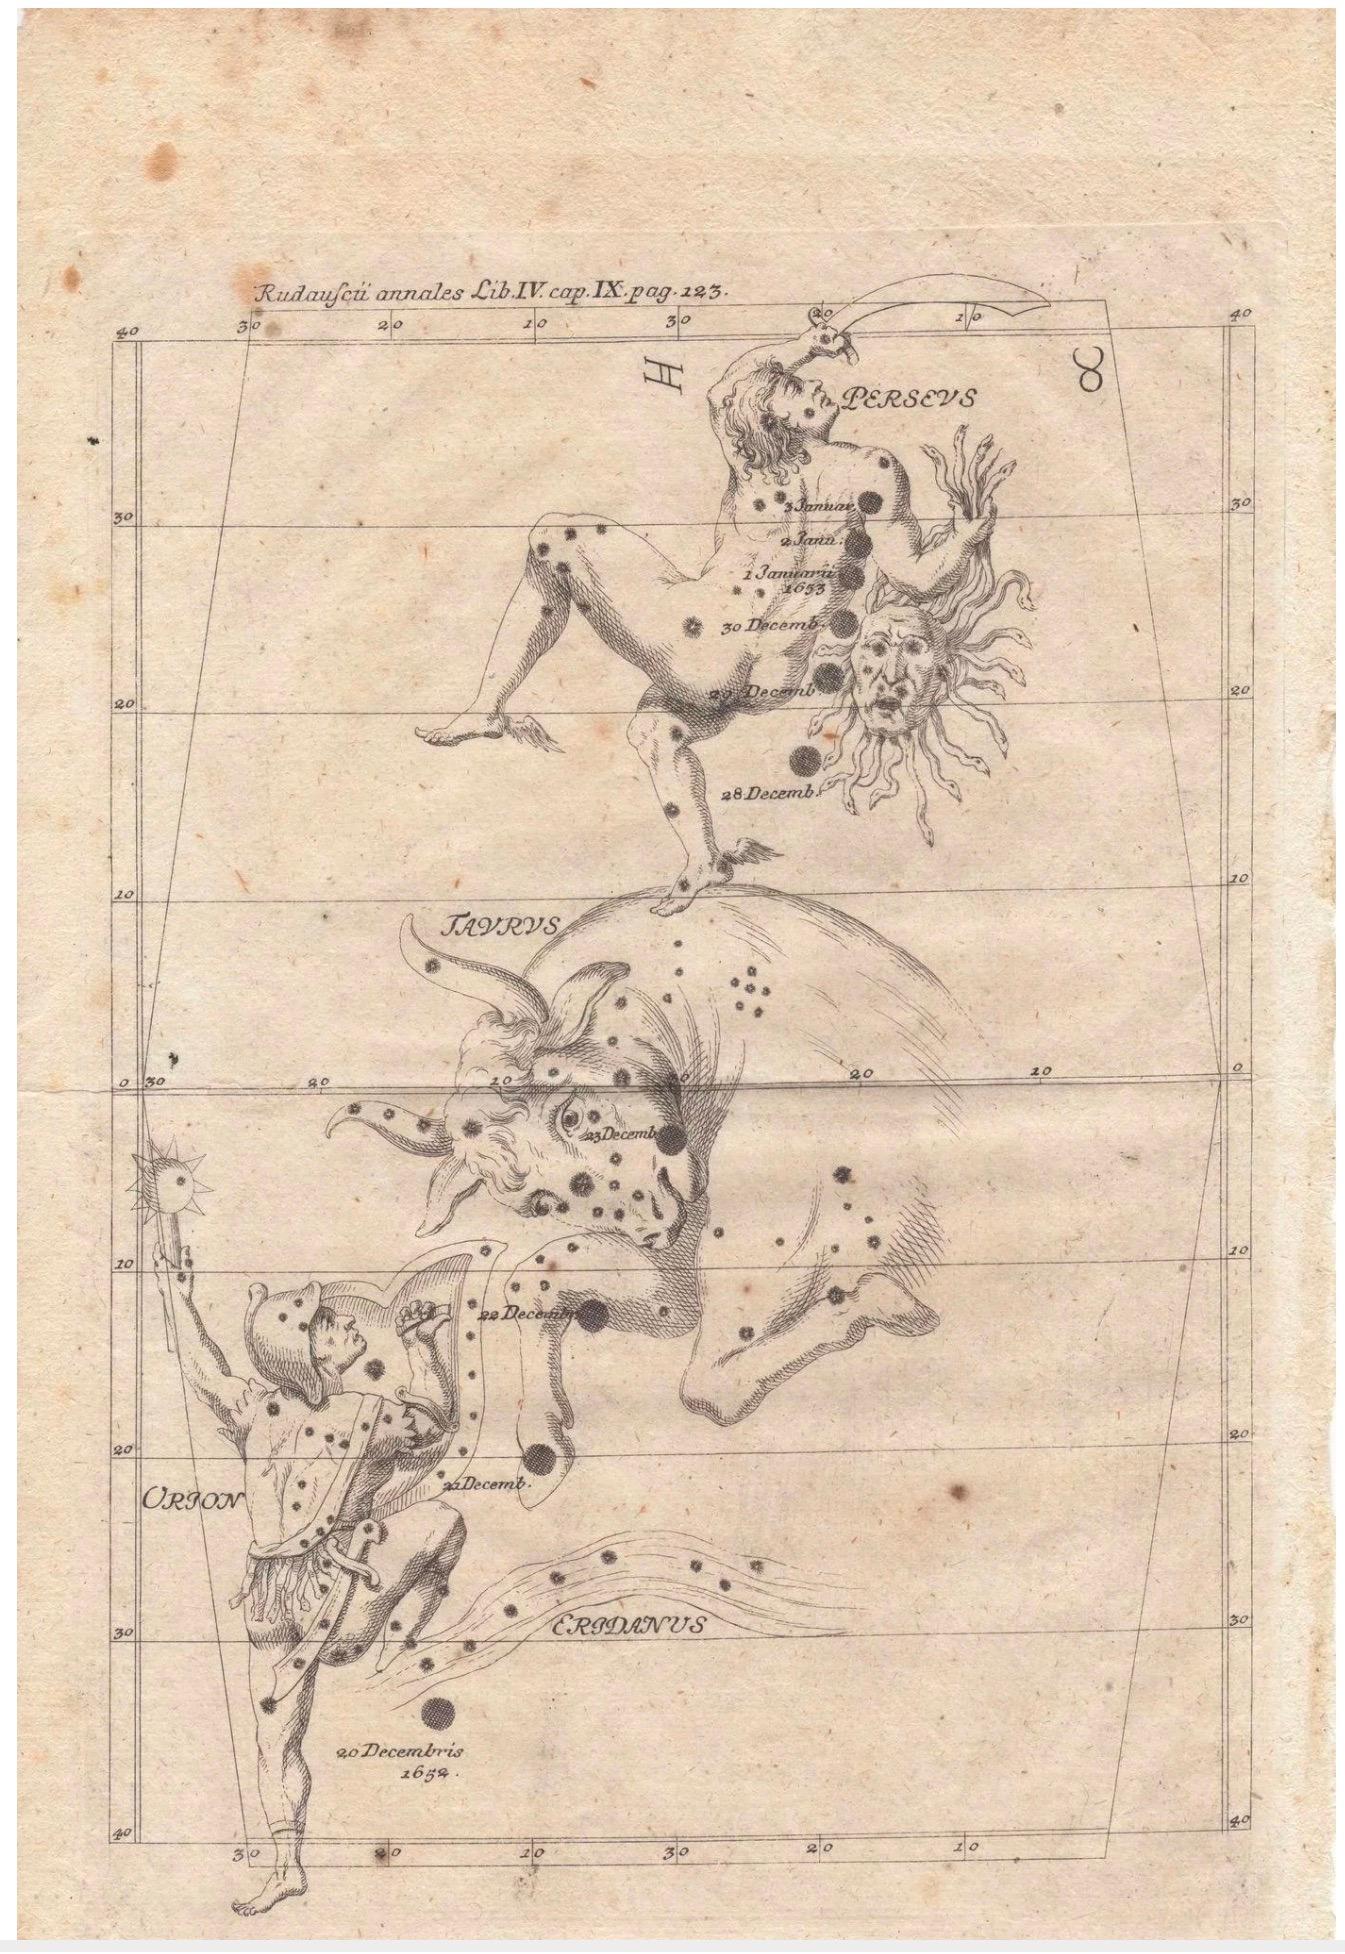 Unknown Print - 17th to 18th Century "Orbit of a Comet" Engraving 